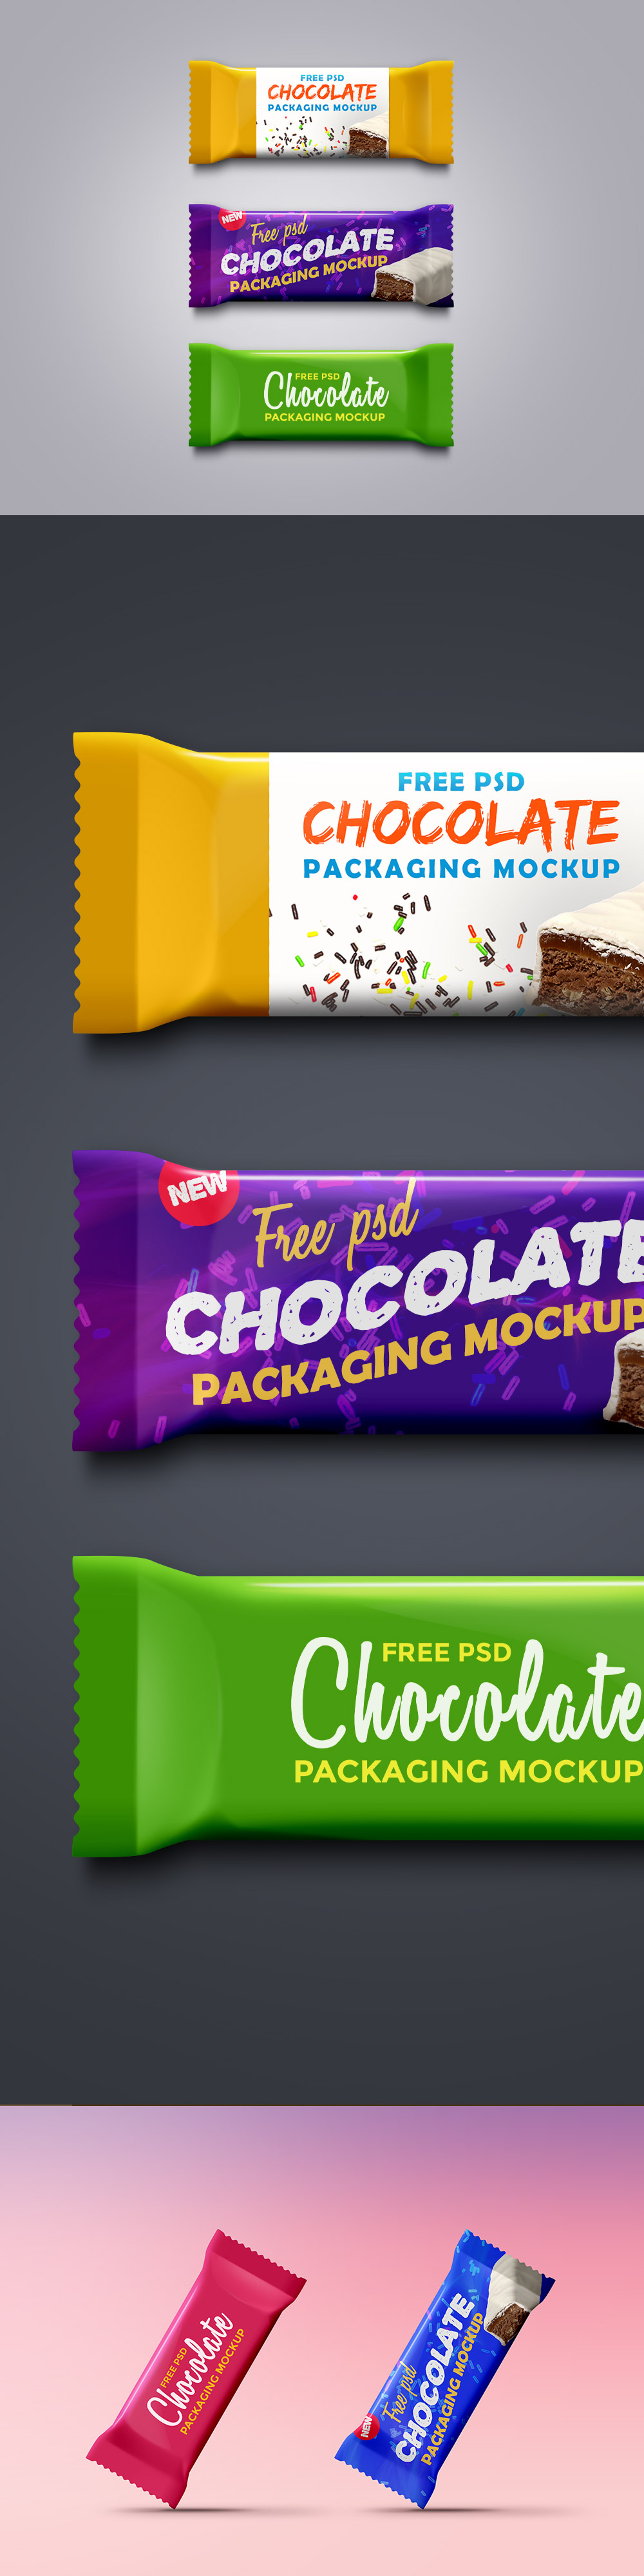 Chocolate Packaging MockUp PSD Template - Responsive ...